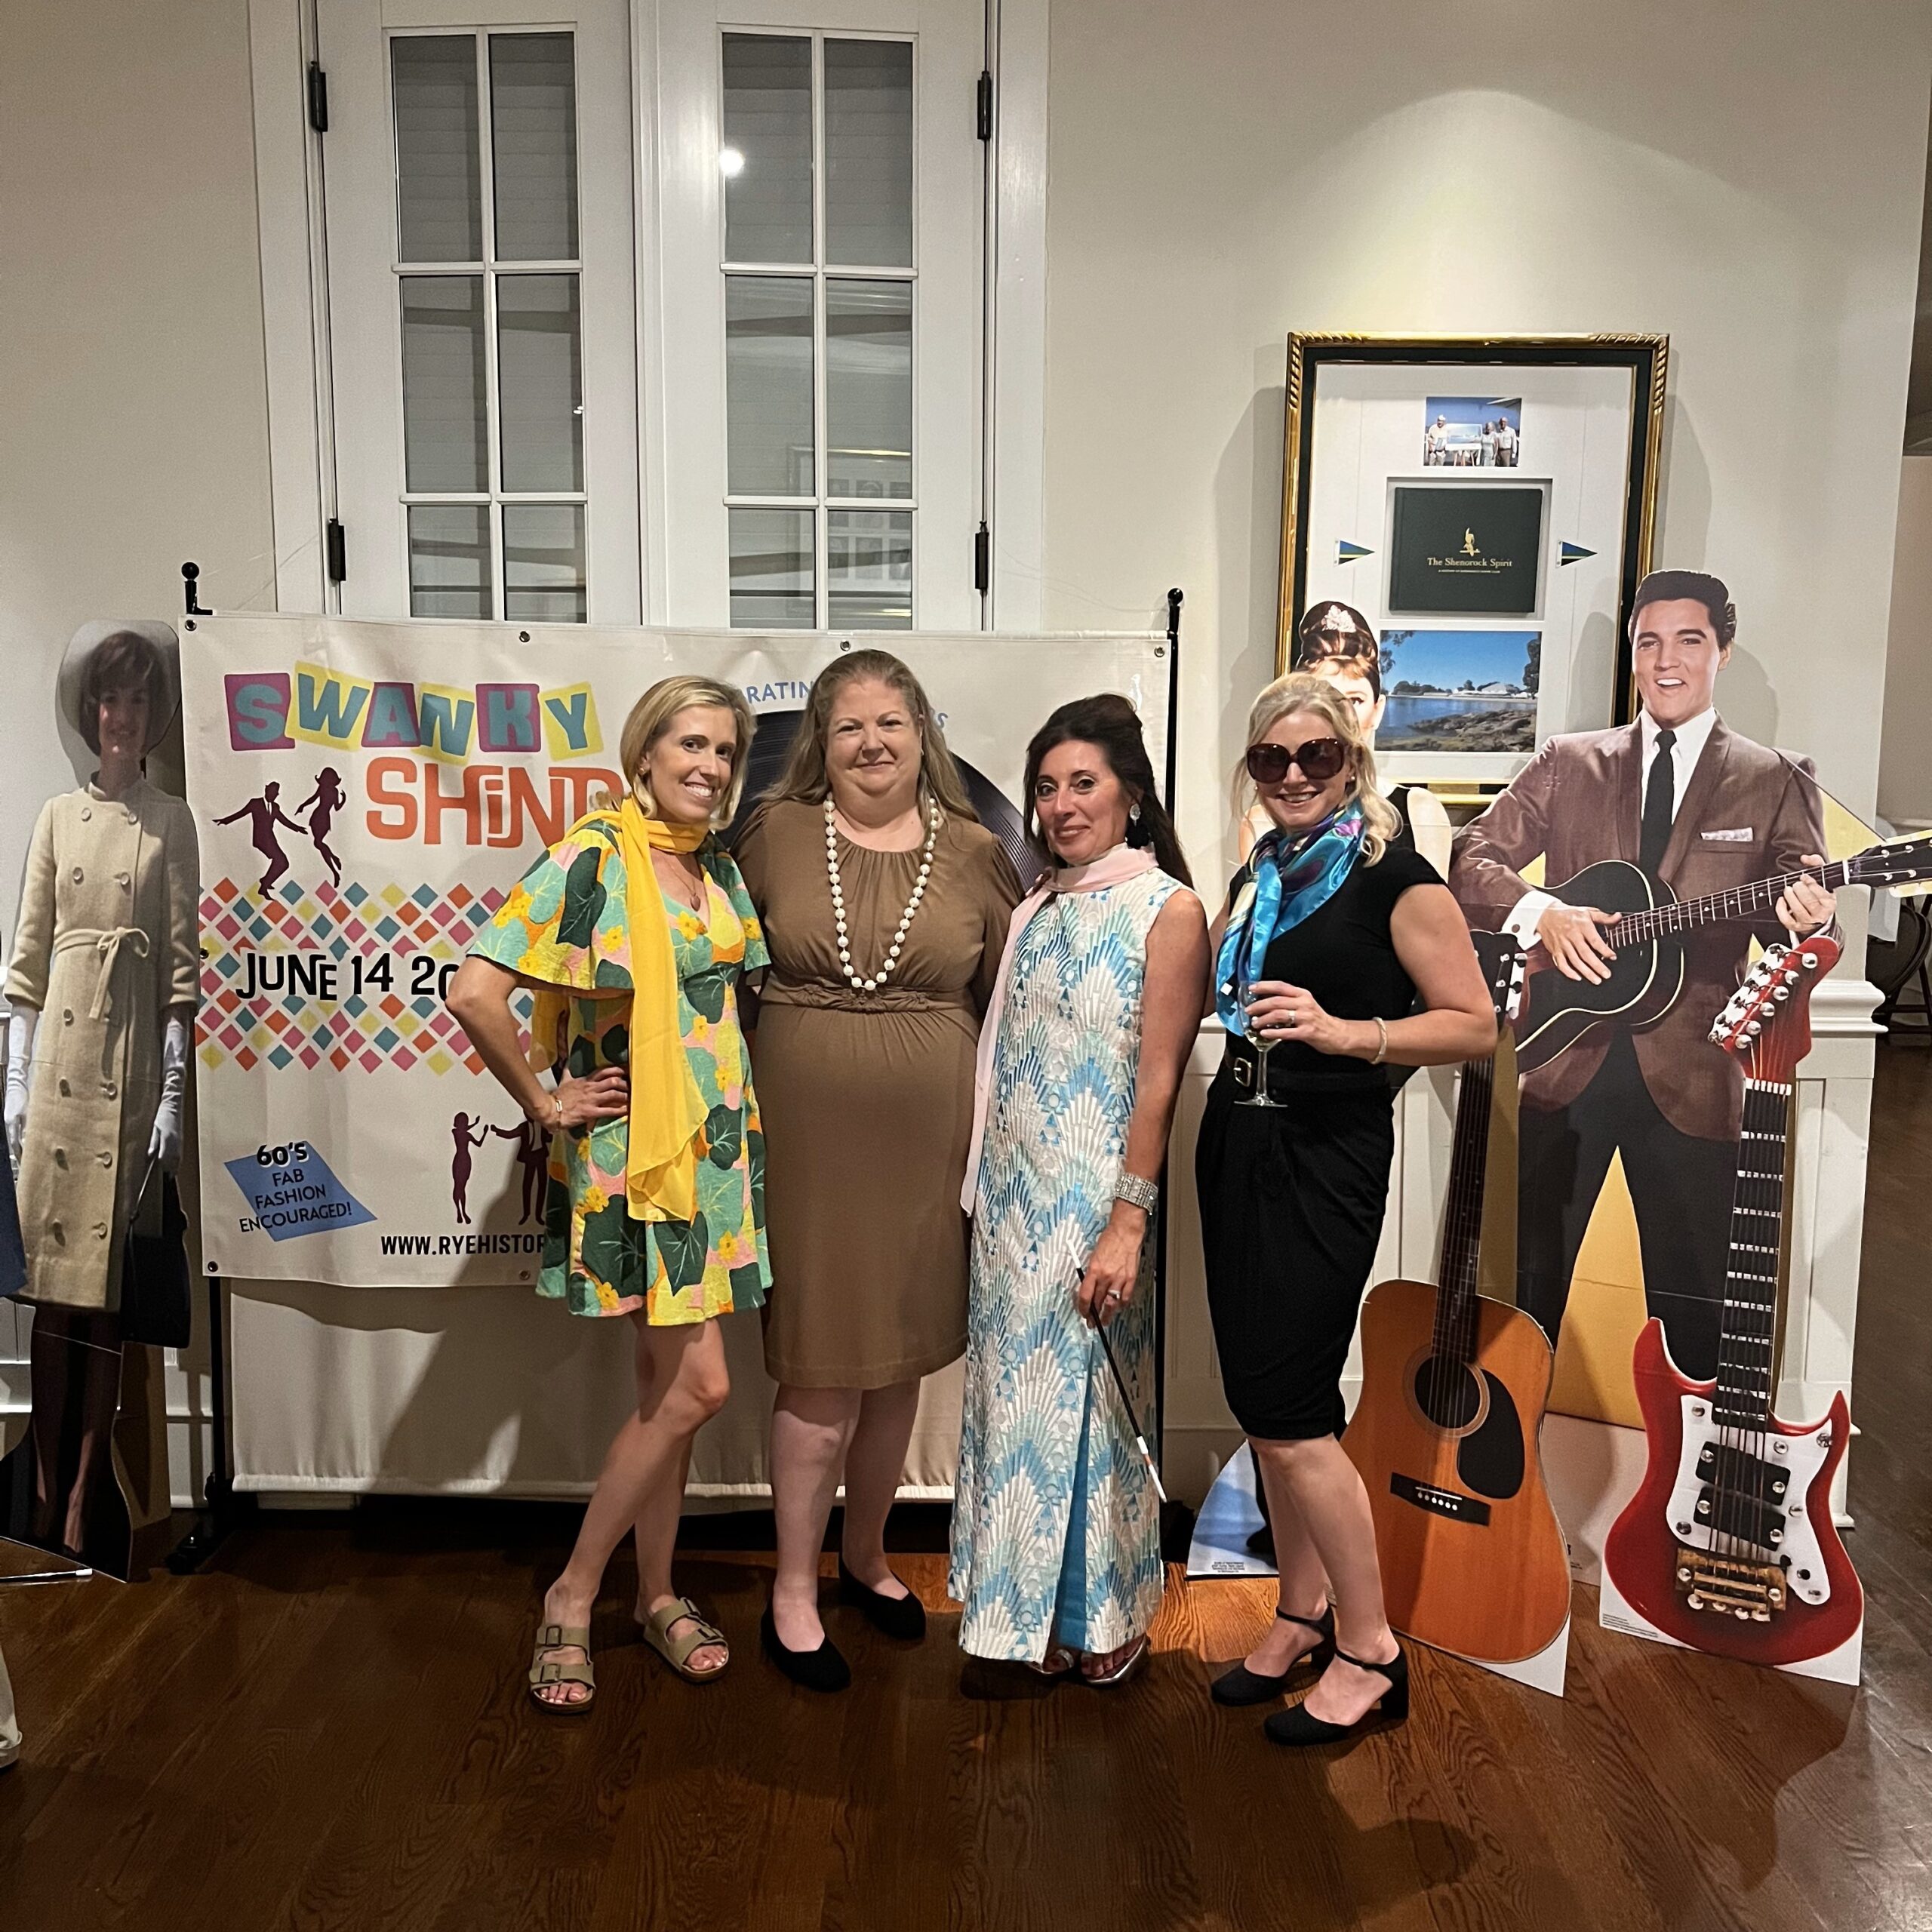 From left to right: Allison Young, Vanessa Mayo, Jackie Jenkins, and Kendra Moran, Board ofTrustees members of the Rye Historical Society, with Board President Jackie Jenkins.